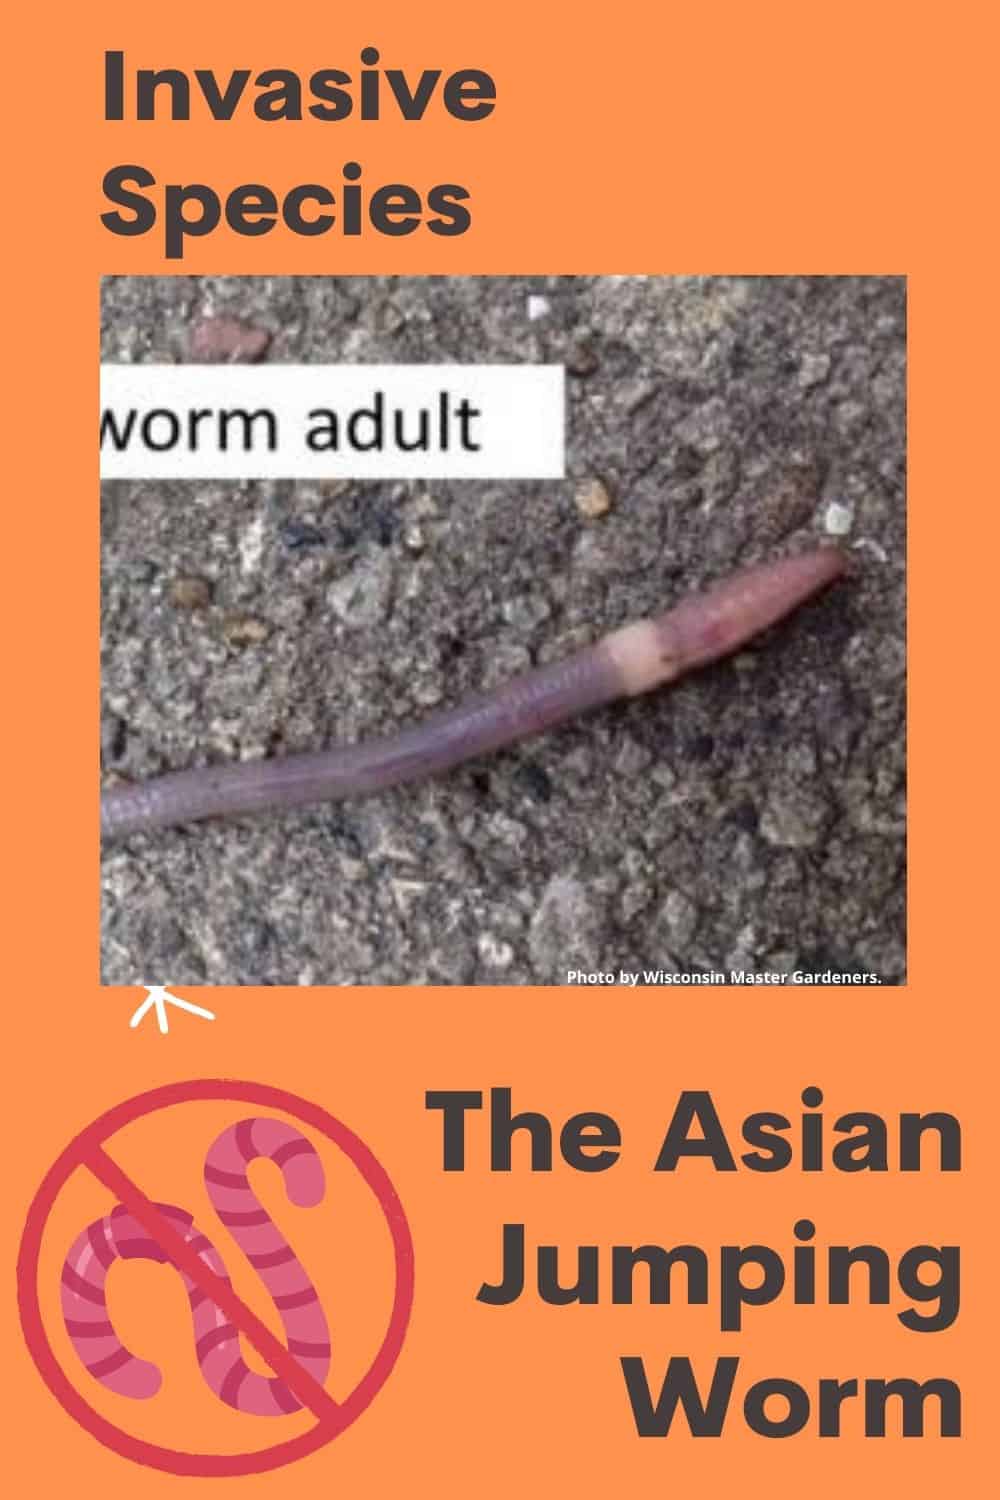 The Asian Jumping worm